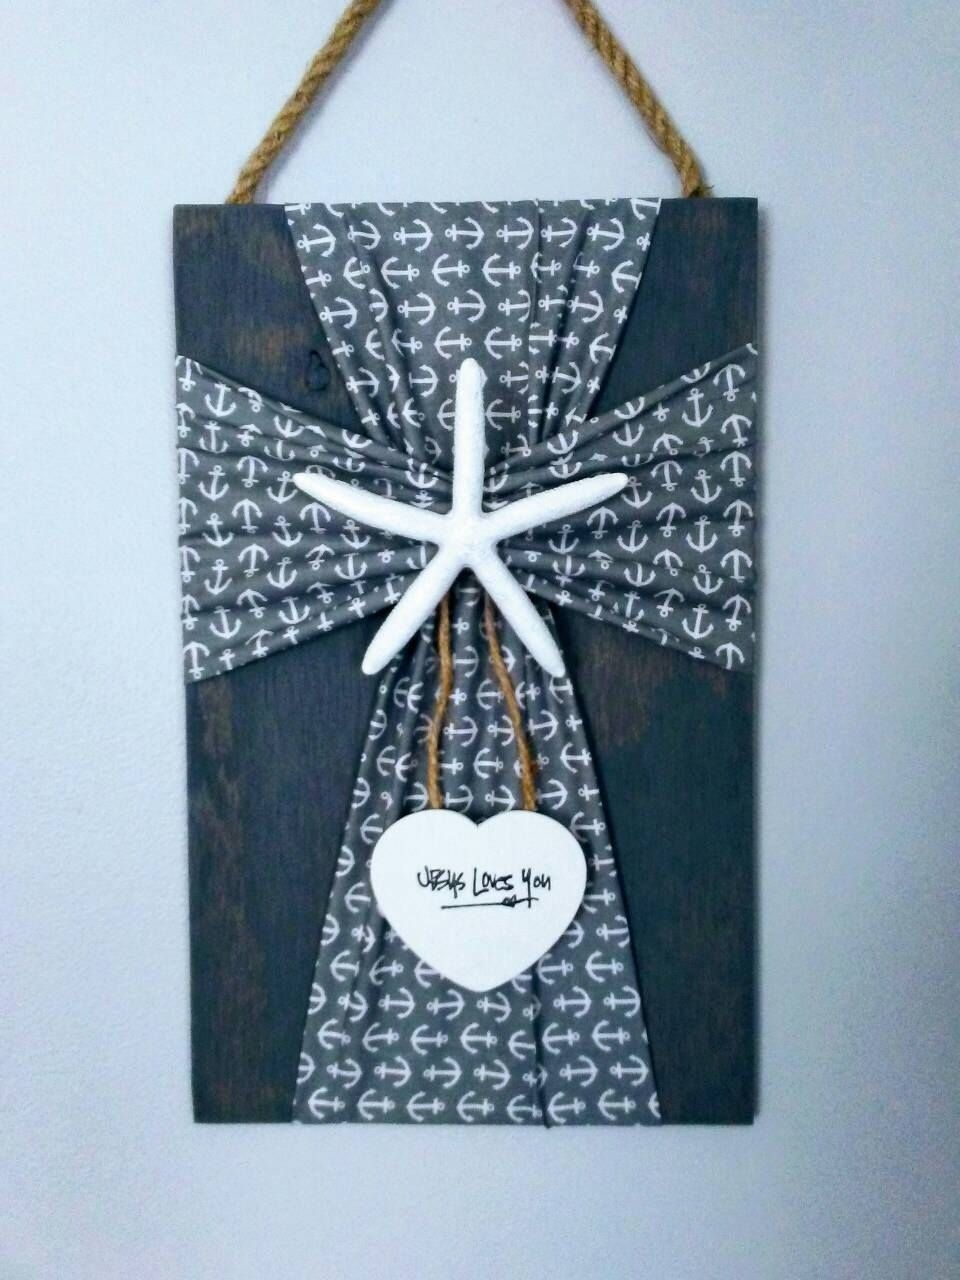 Fabric Cross,wooden Plaque, Cross Wall Decor, Christian Wall Art Intended For Most Recently Released Fabric Cross Wall Art (View 11 of 15)